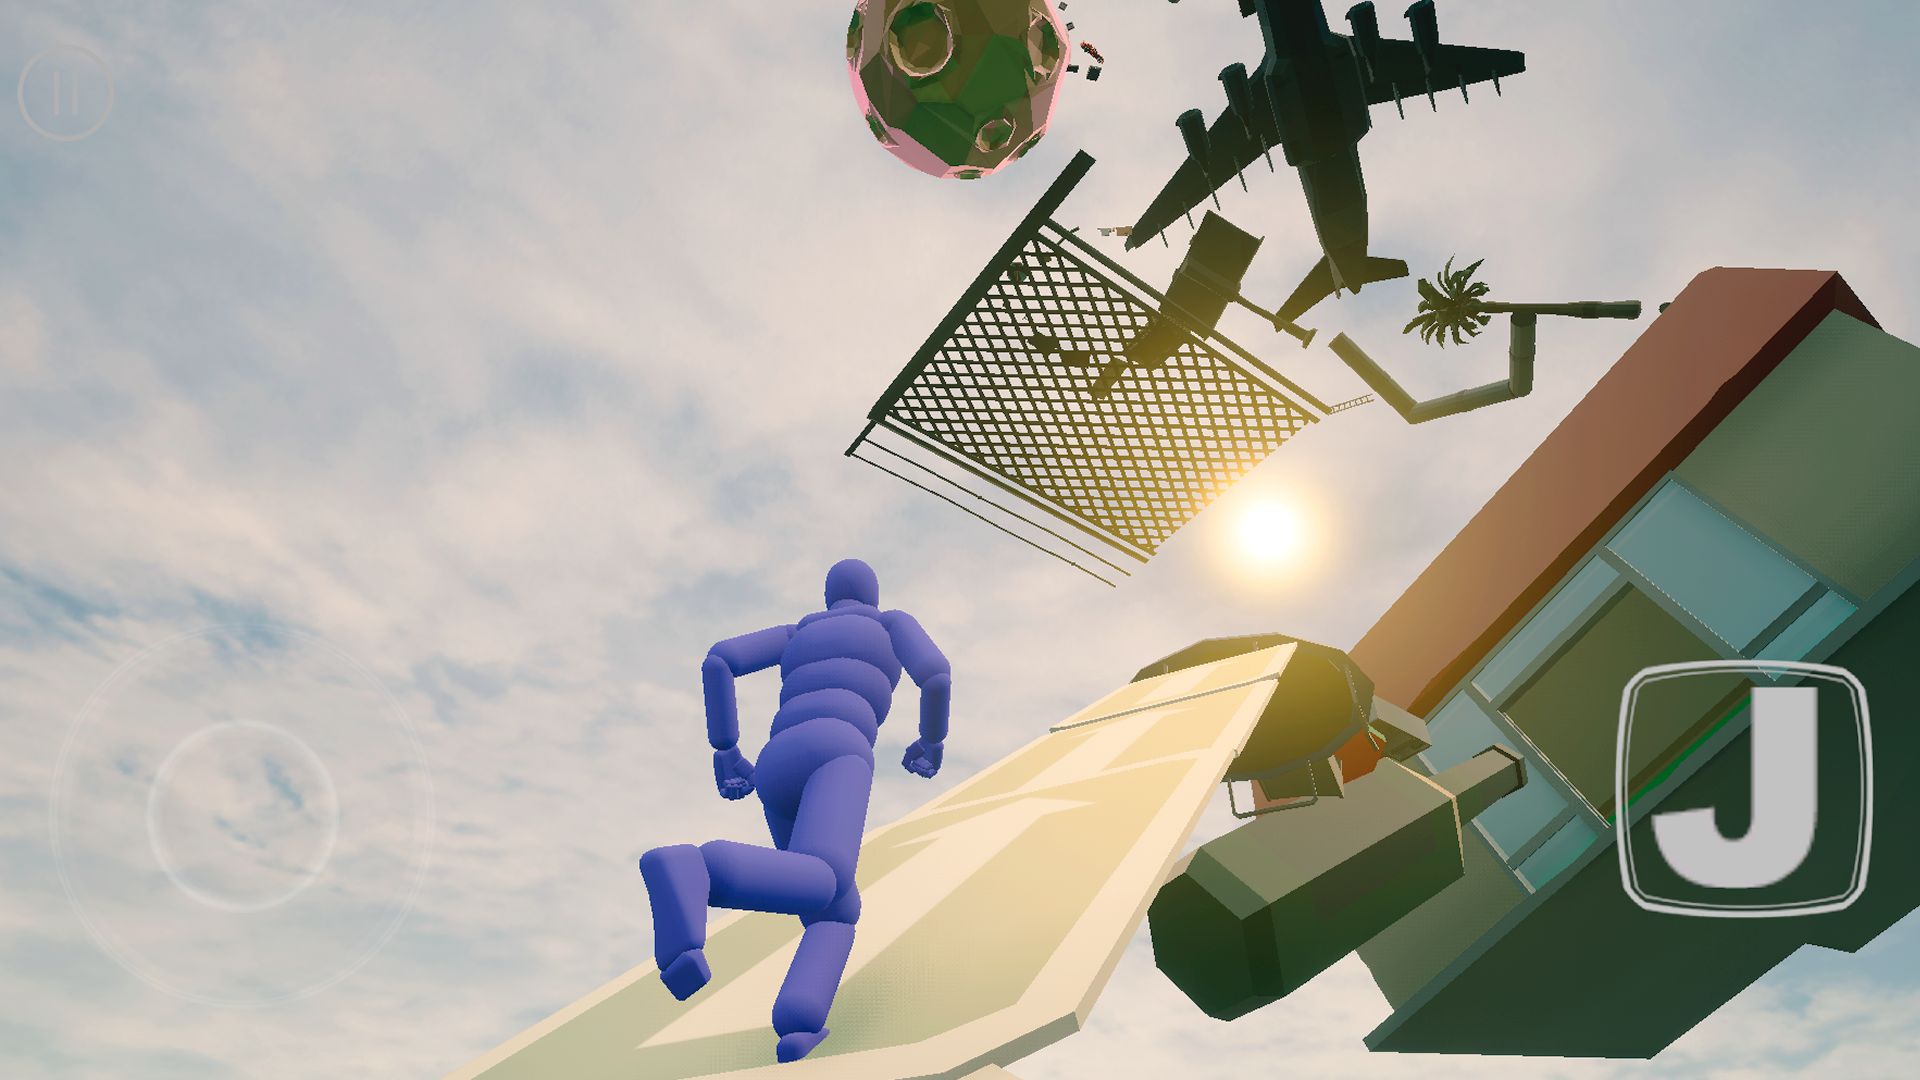 Download Only Up! Parkour Ragdoll Android free game.